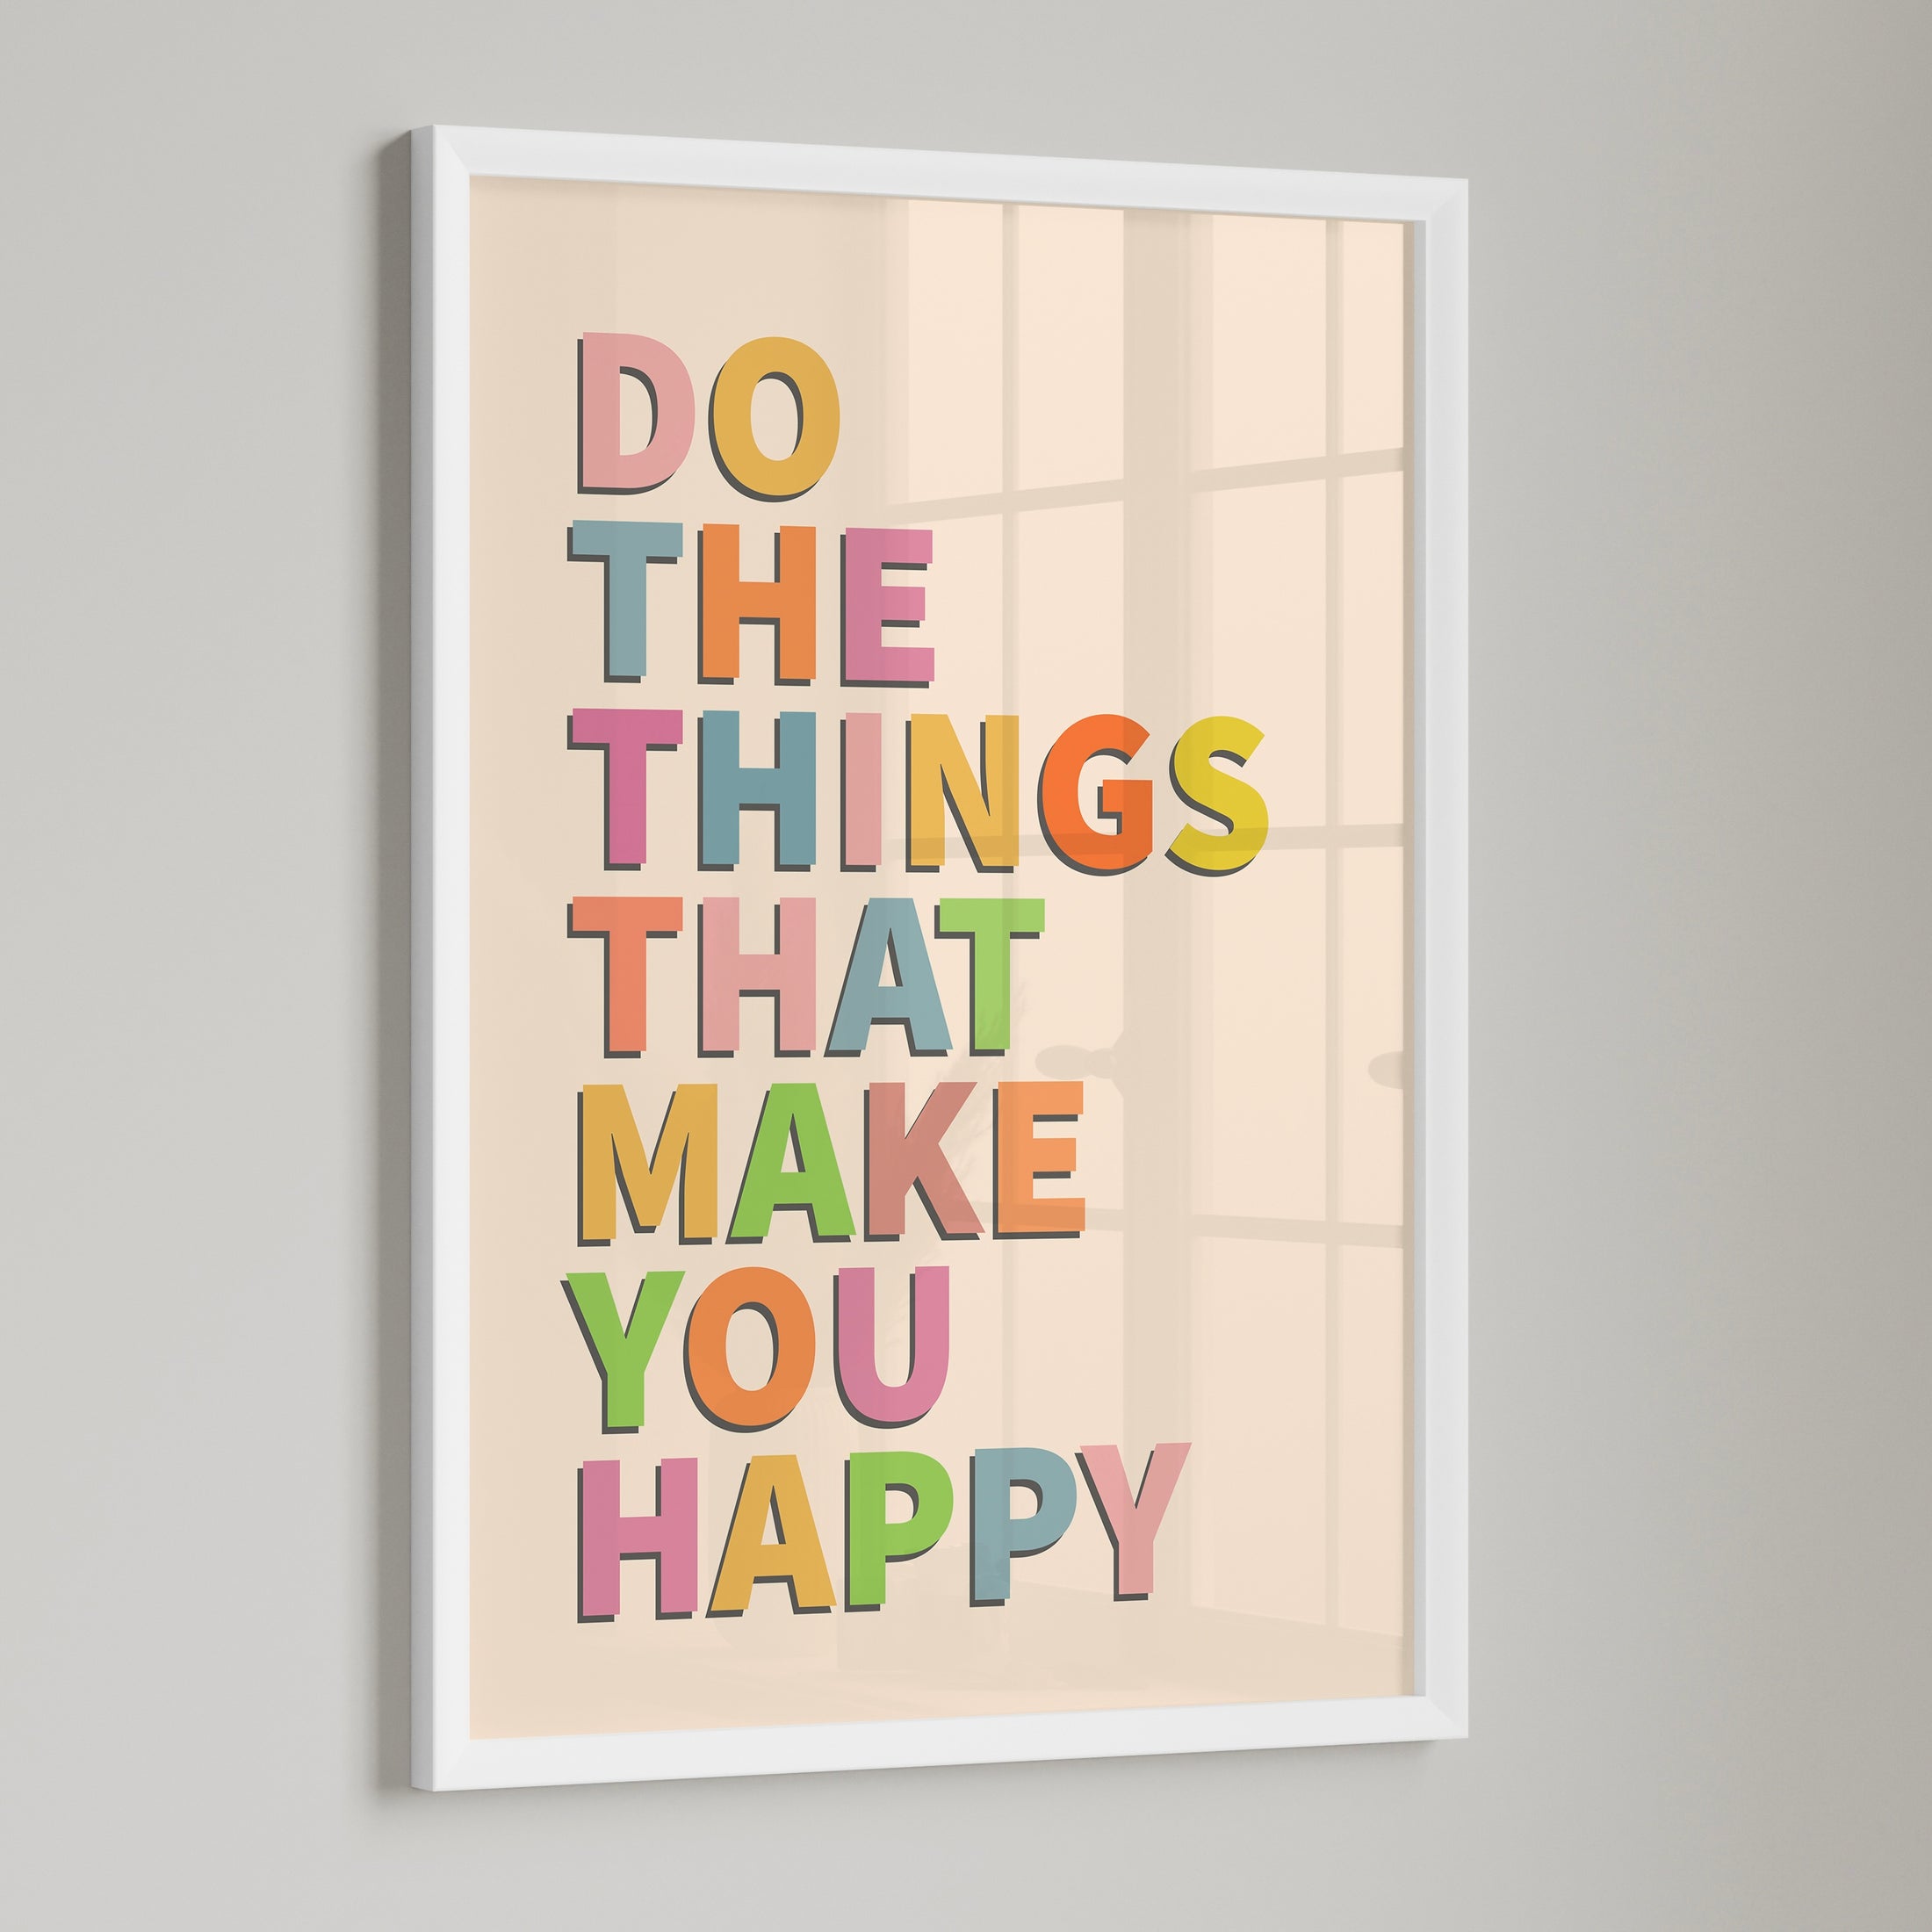 Do the things that make you happy 2